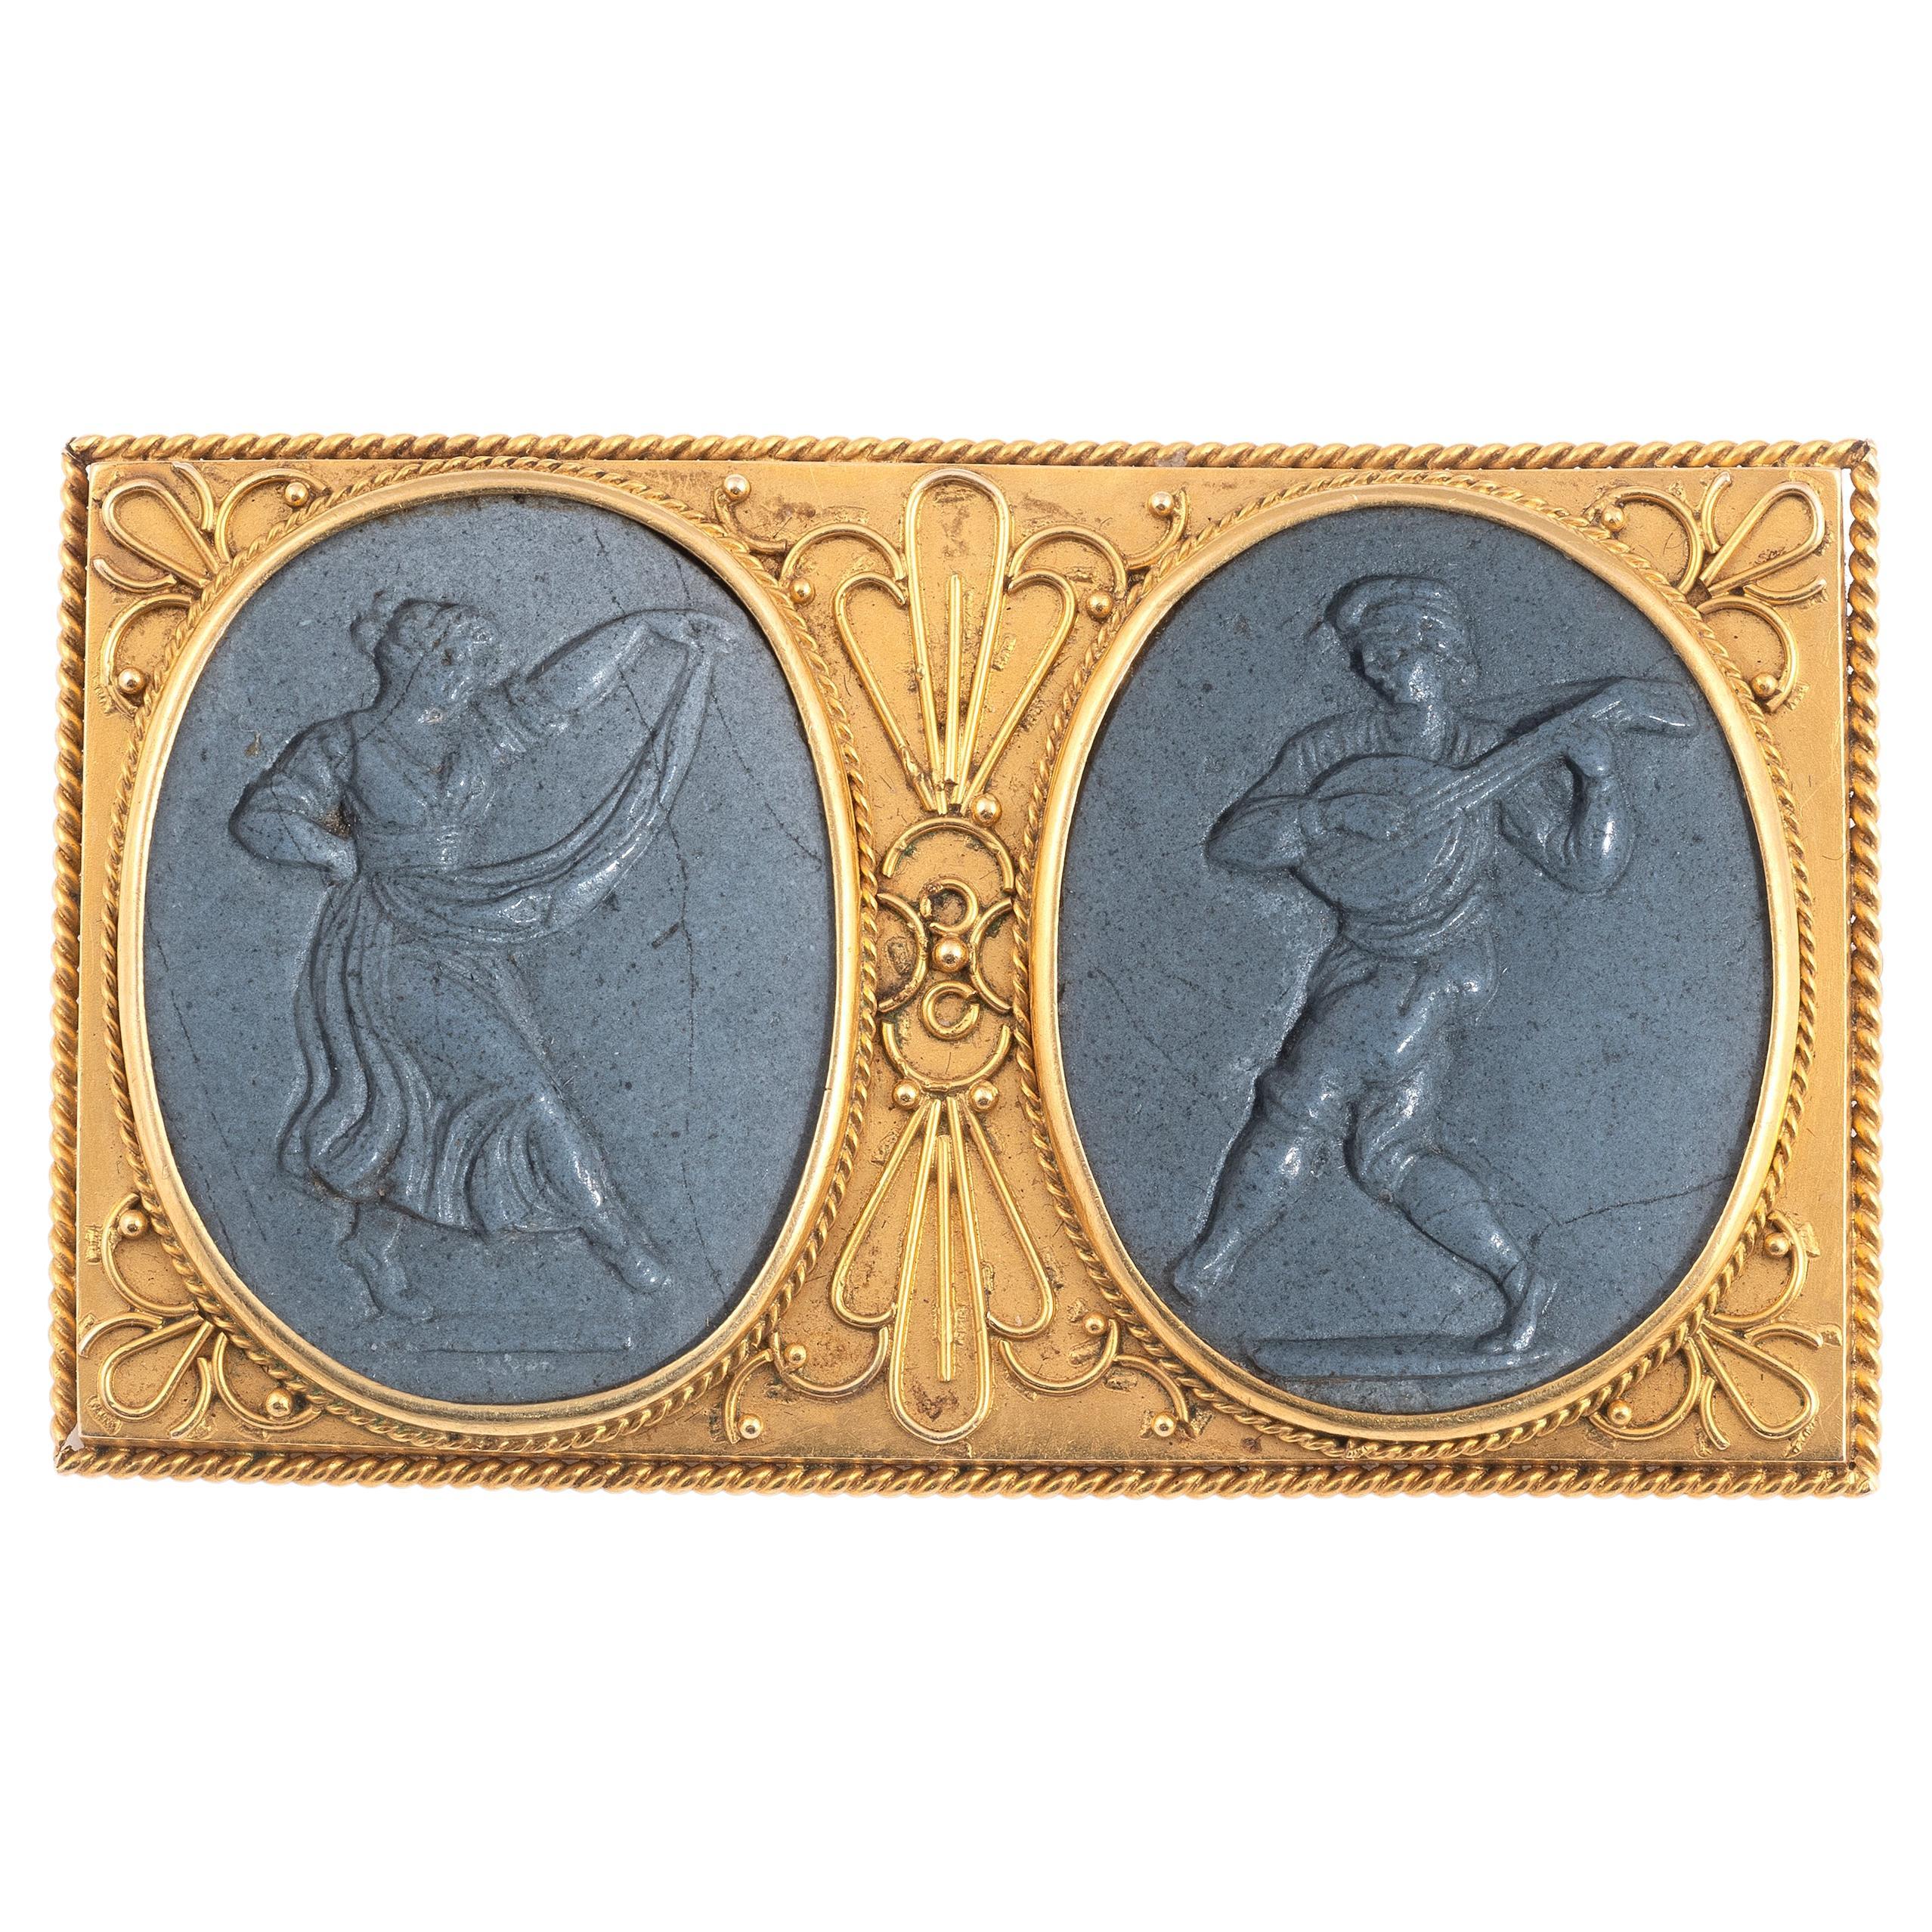 Archaeological Revival Gold And Lava Cameo Brooch Late 19th Century For Sale